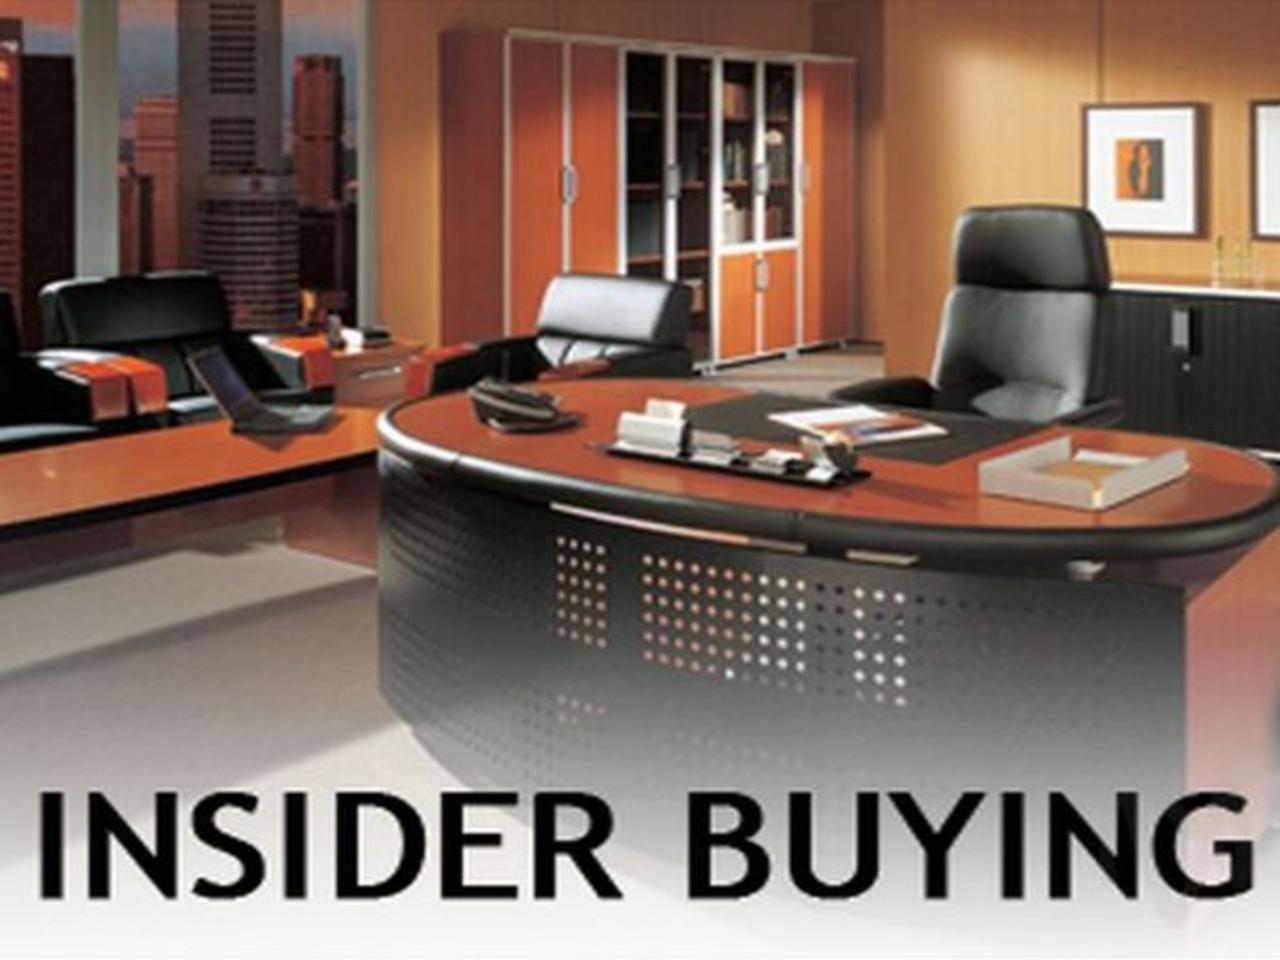 Tuesday 11/30 Insider Buying Report: EOG, EVRG